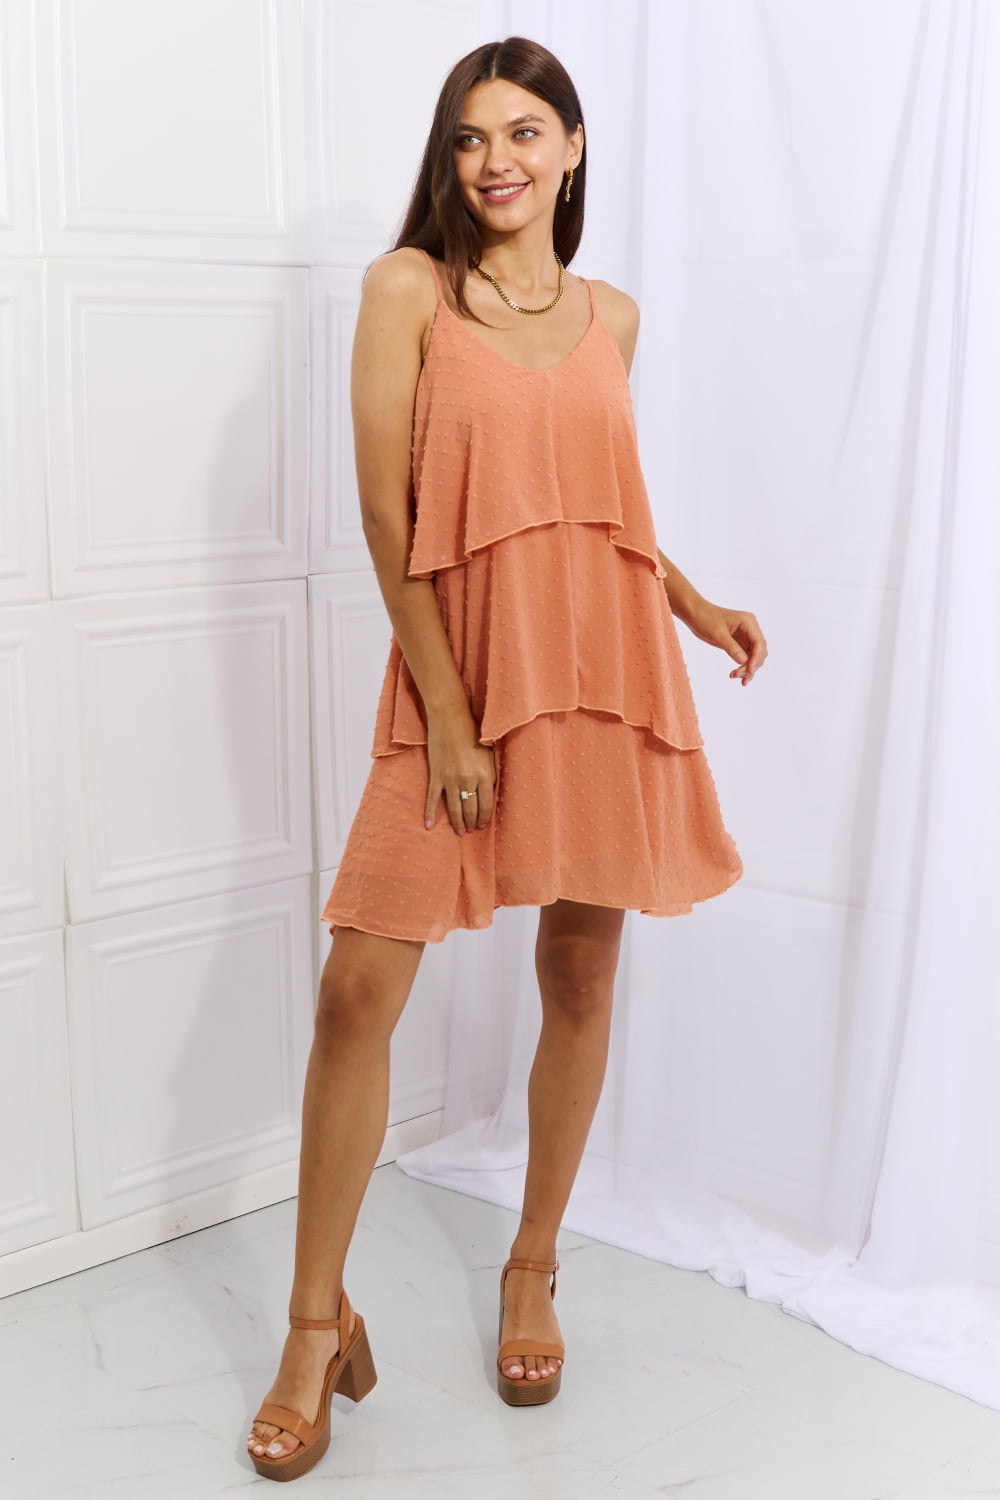 By The River Full Size Cascade Ruffle Style Cami Dress in Sherbet - All Dresses - Dresses - 4 - 2024